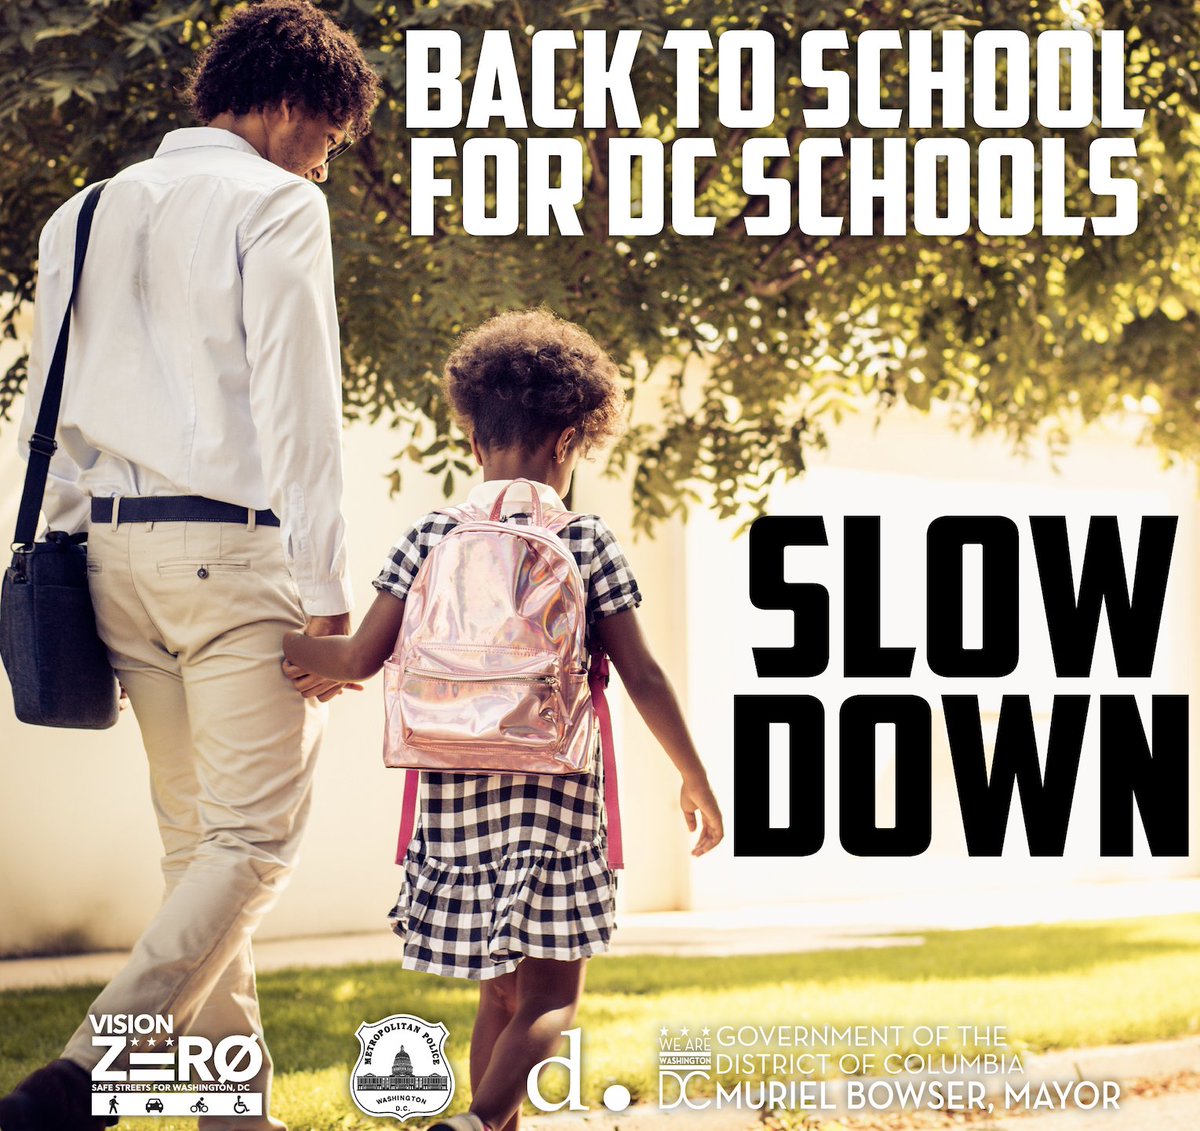 The first day of school is tomorrow. Drivers, keep an eye out for more children walking to and from school. Slow down in and around school zones. #BackToSchoolDC #PedestrianSafety #DDOTDC #VisionZeroDC